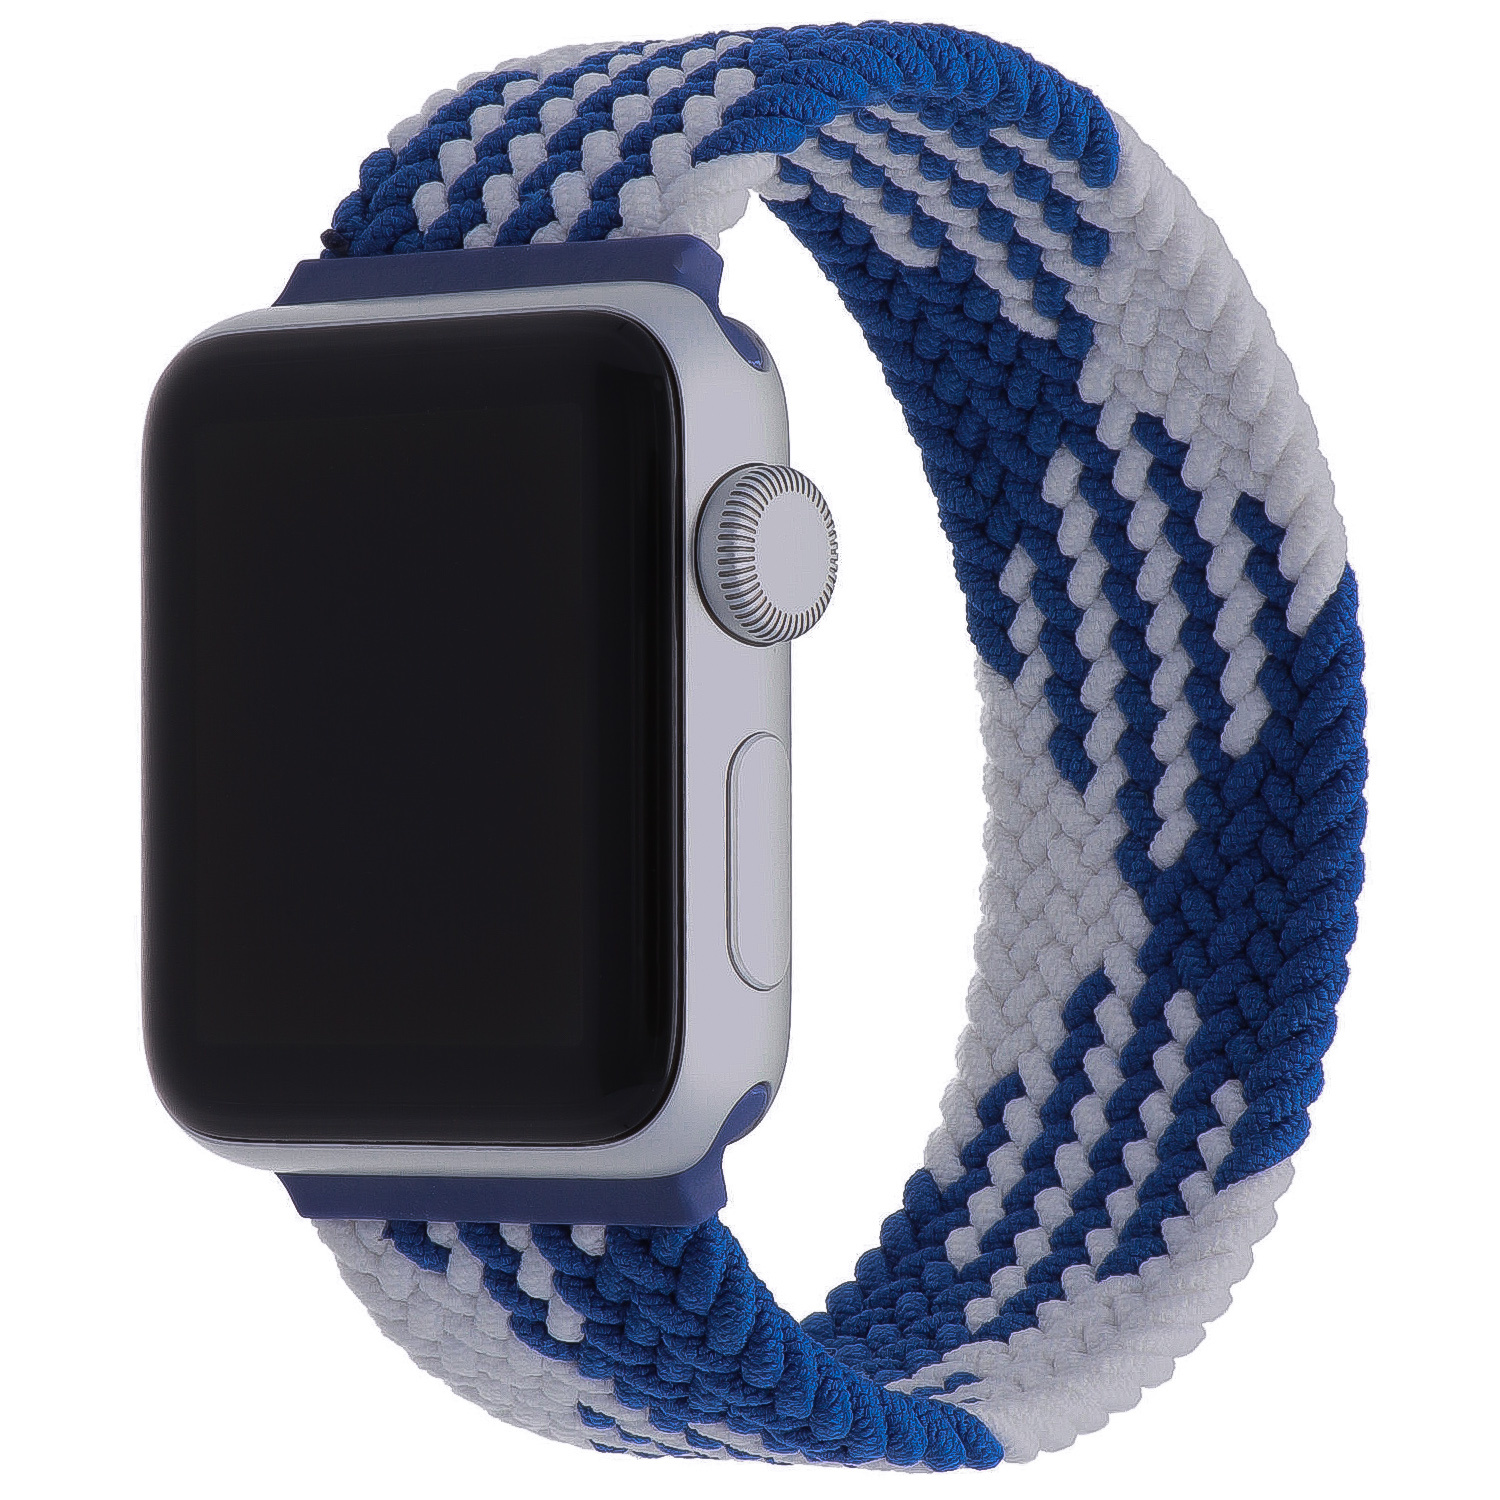 Apple Watch Nylon Braided Solo Loop Strap - Blue And White